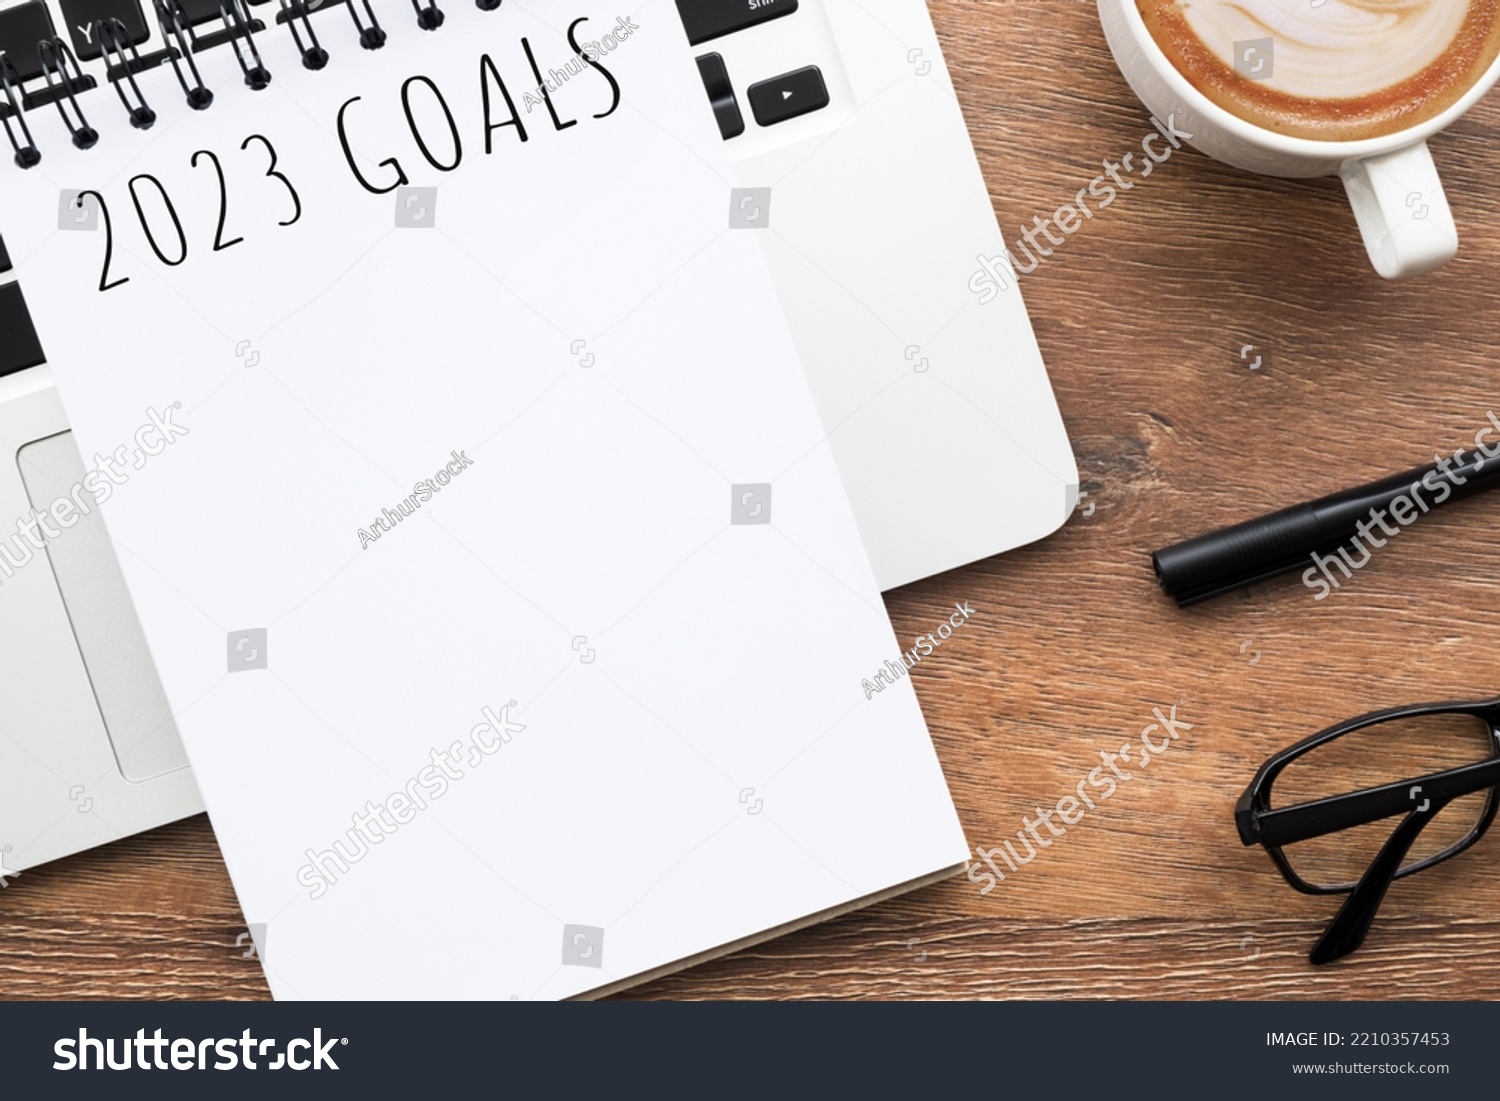 Notebook with 2023 goals text on it to apply new year resolutions and plan. #2210357453